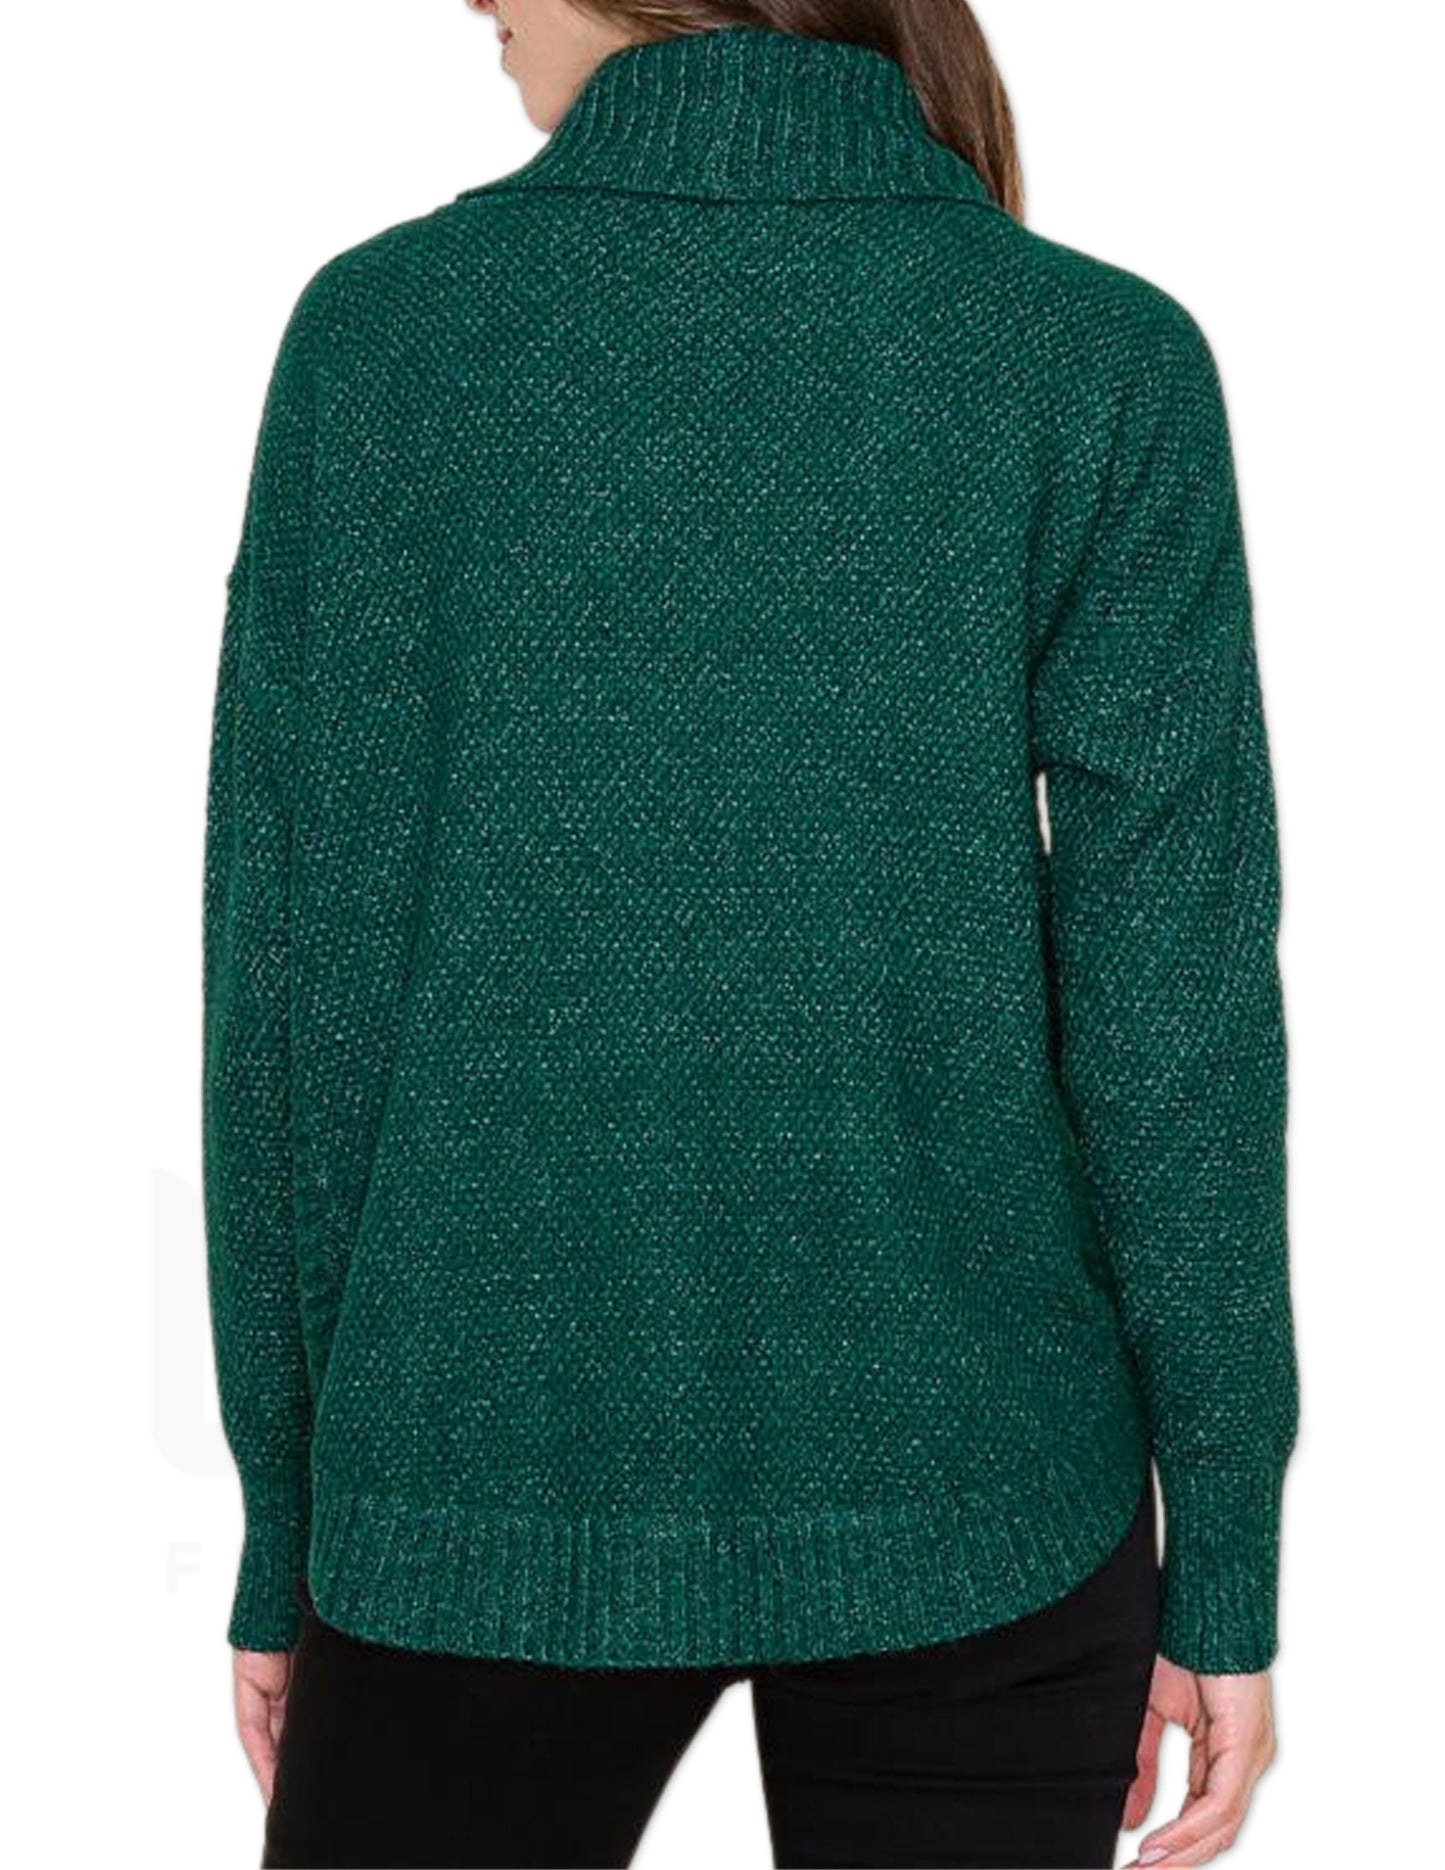 Slouchy Turtle Neck Waffle Knit Sweater - Forest